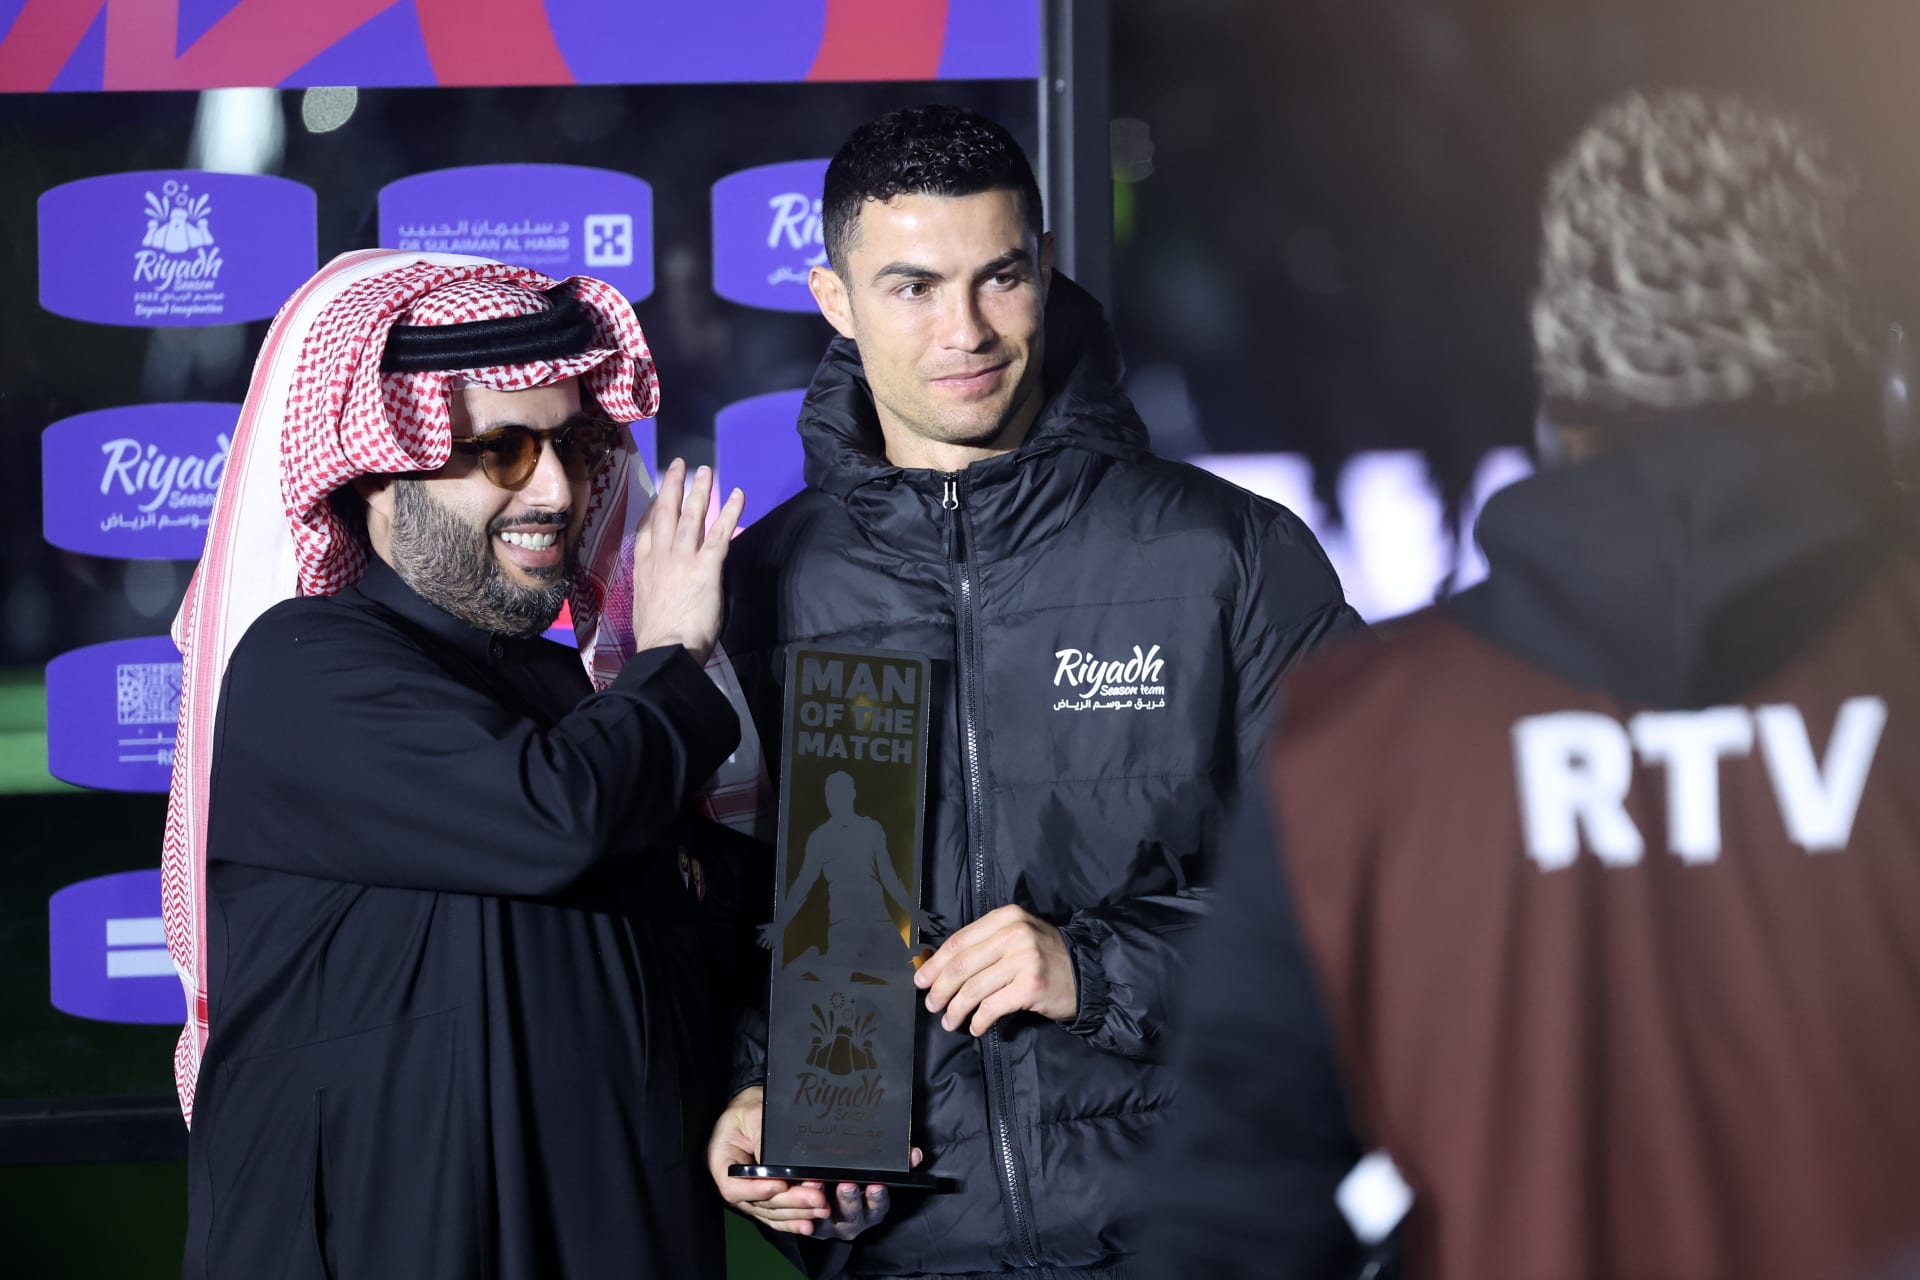 Turki Al-Sheikh, the head of the General Entertainment Authority in KSA, announced a new initiative with Portuguese player Cristiano Ronaldo.